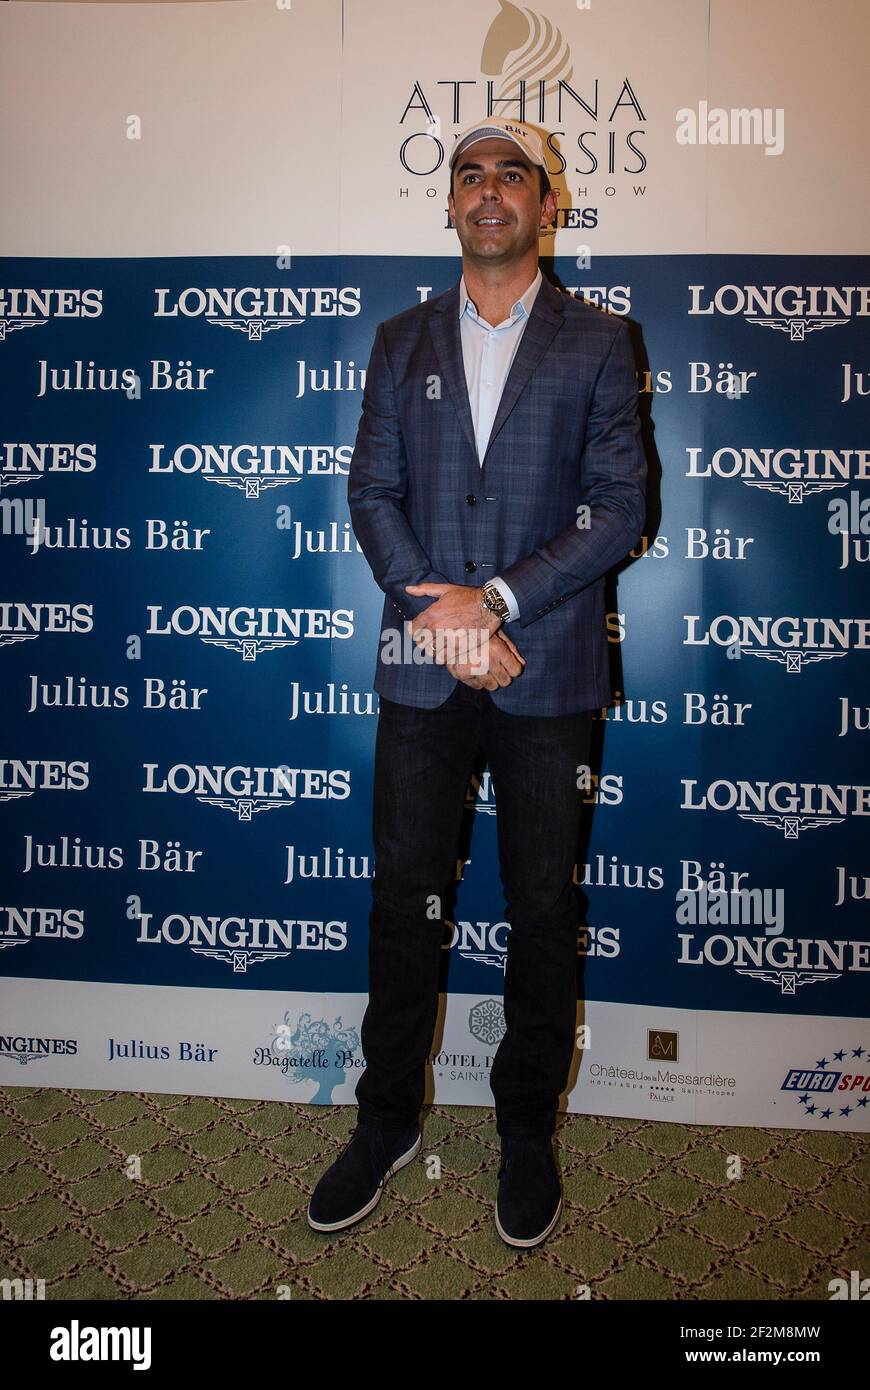 ALVARO DE MIRANDA (Rider), during the Press conference at the Bristol hotel in Paris, France, on May 21, 2014 for the Longines Athina Onassis Horse Show in June 5th-7th in Pampelonne beach, Saint Tropez, France - Photo Christophe Bricot / DPPI Stock Photo